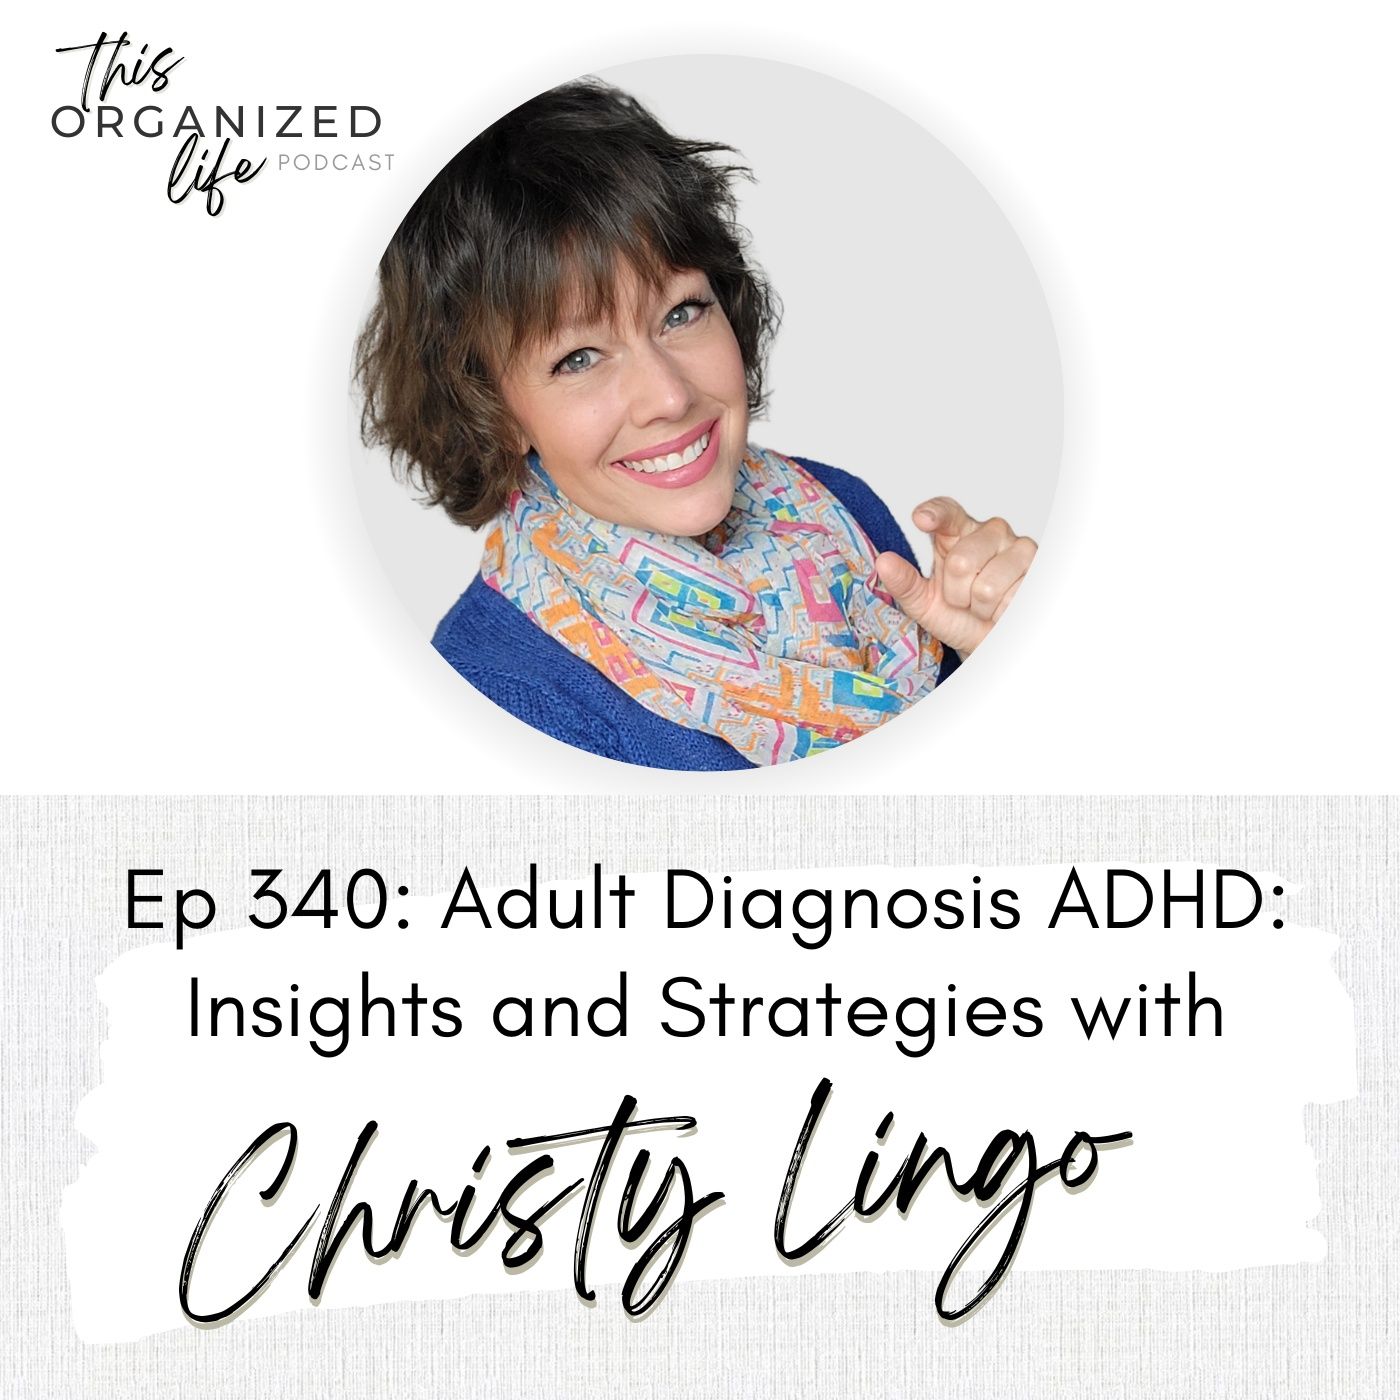 Adult Diagnosis ADHD: Insights and Strategies with Christy Lingo | Ep 340